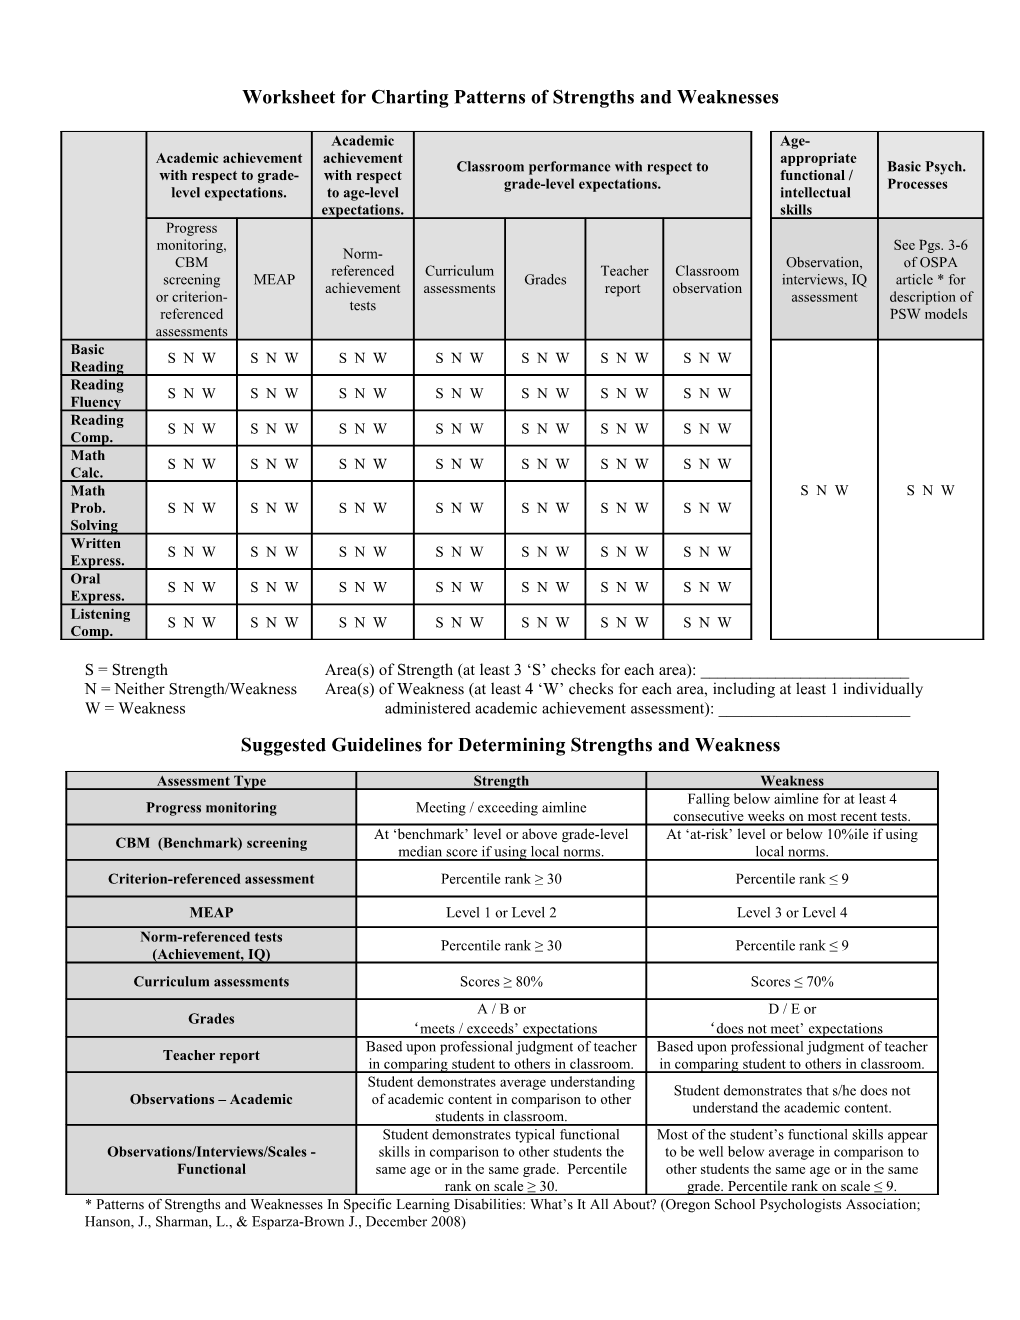 Worksheet For Charting Patterns Of Strengths And Weaknesses